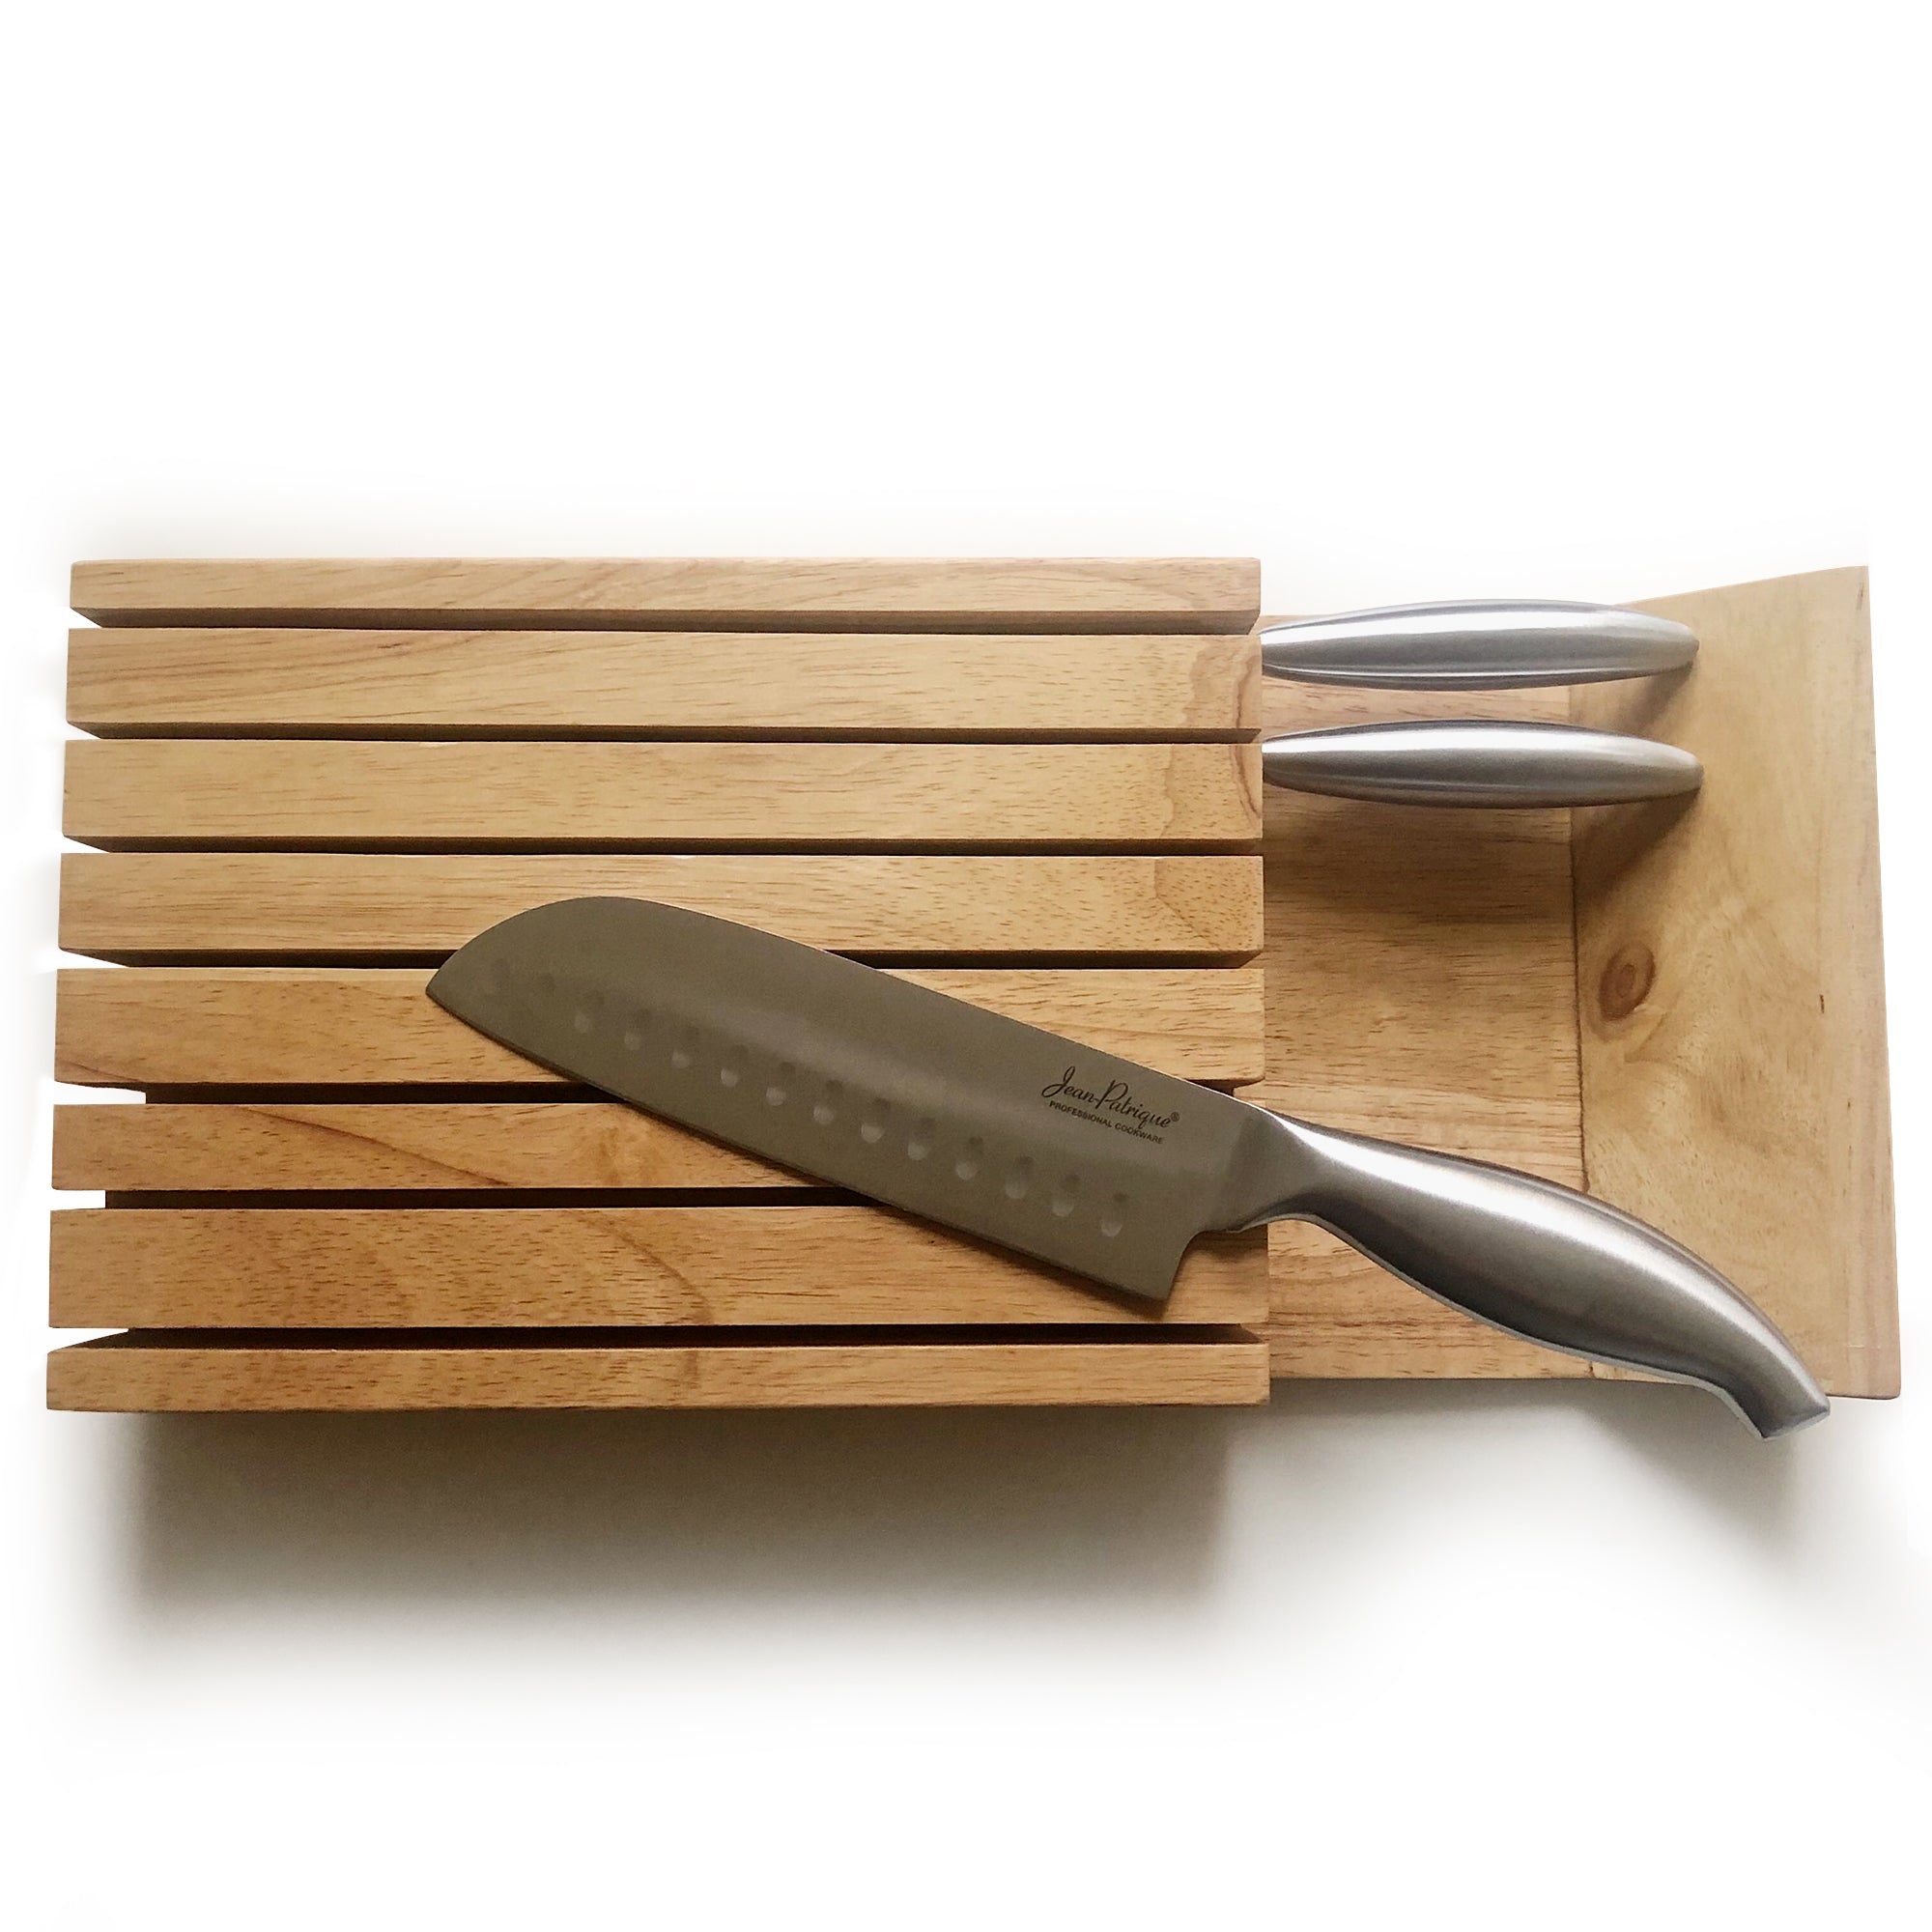 This Genius Knife Drawer Locks Your Knives and Stores Cutting Boards